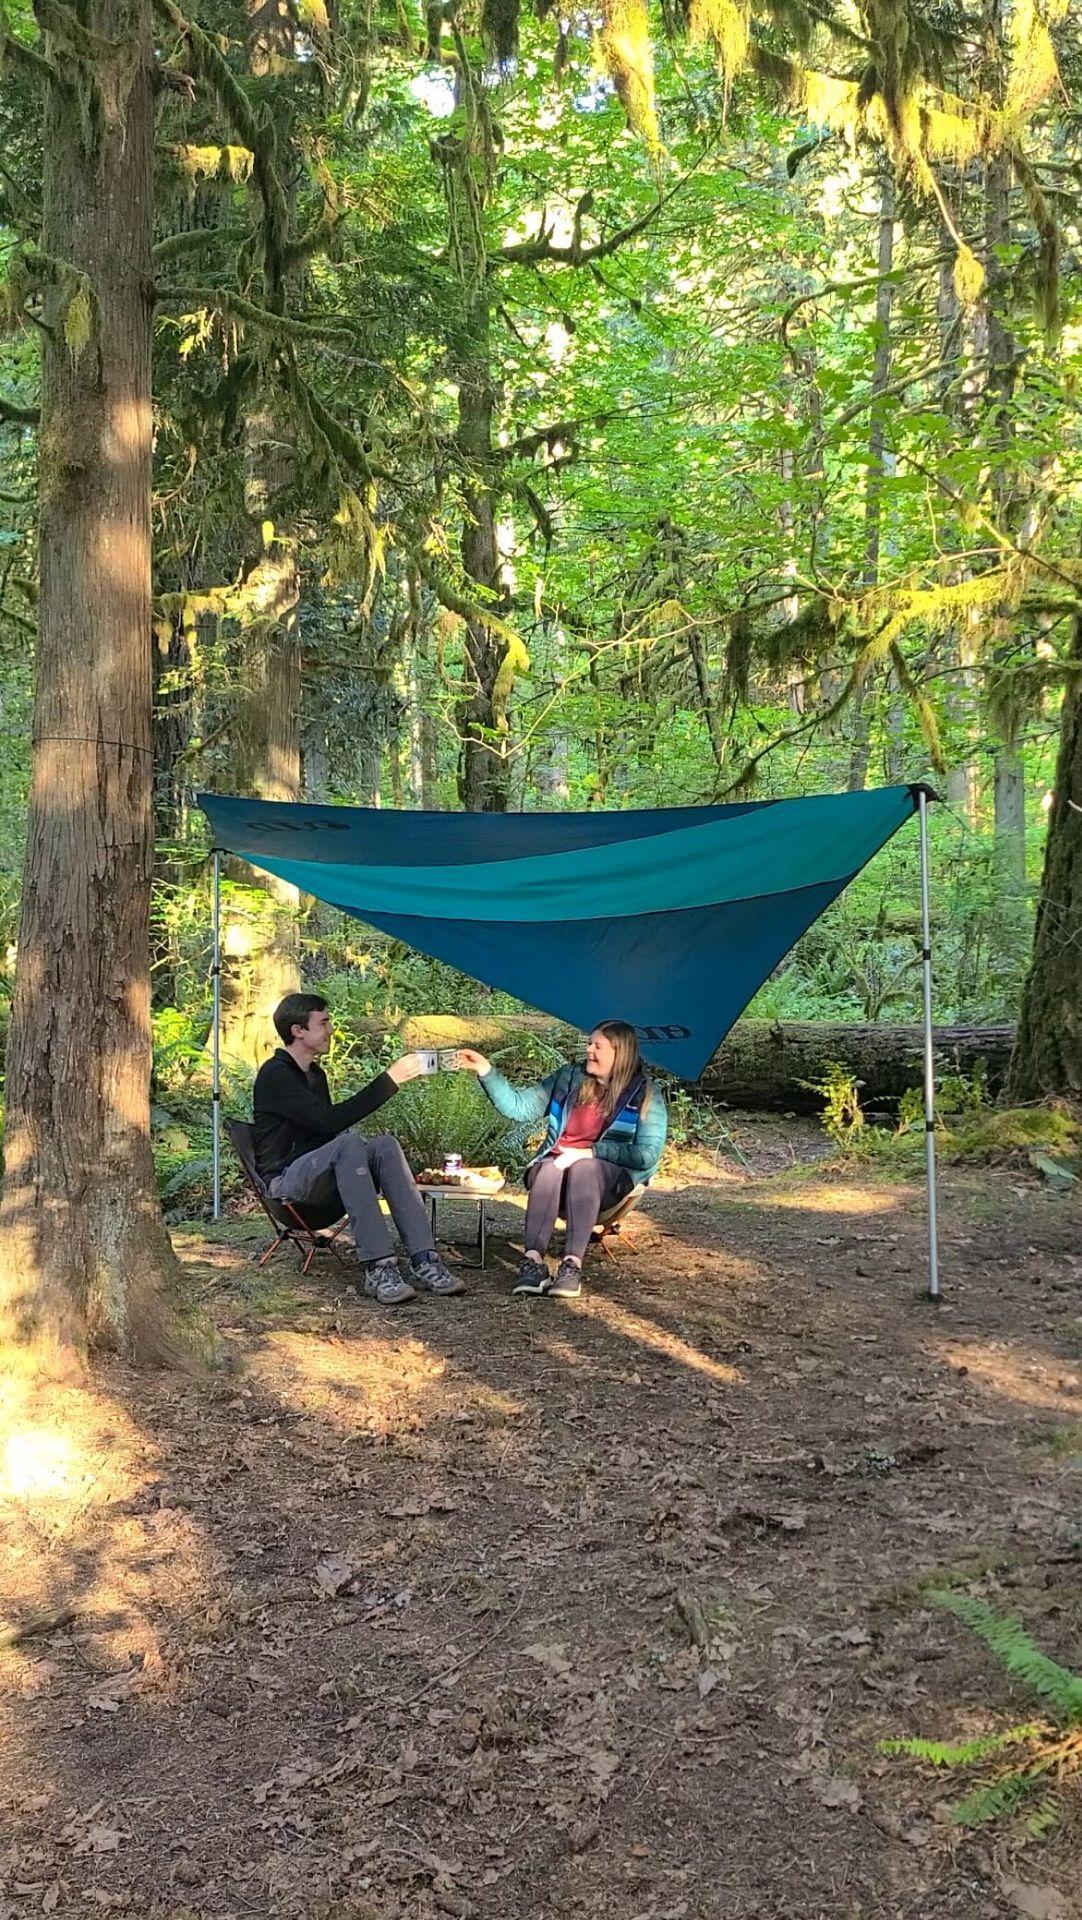 Outdoor adventure doesn’t always have to look like a long hike or an adrenaline-pumping activity. Sometimes, it’s just as nice to take things slow and spend time outside with loved ones.